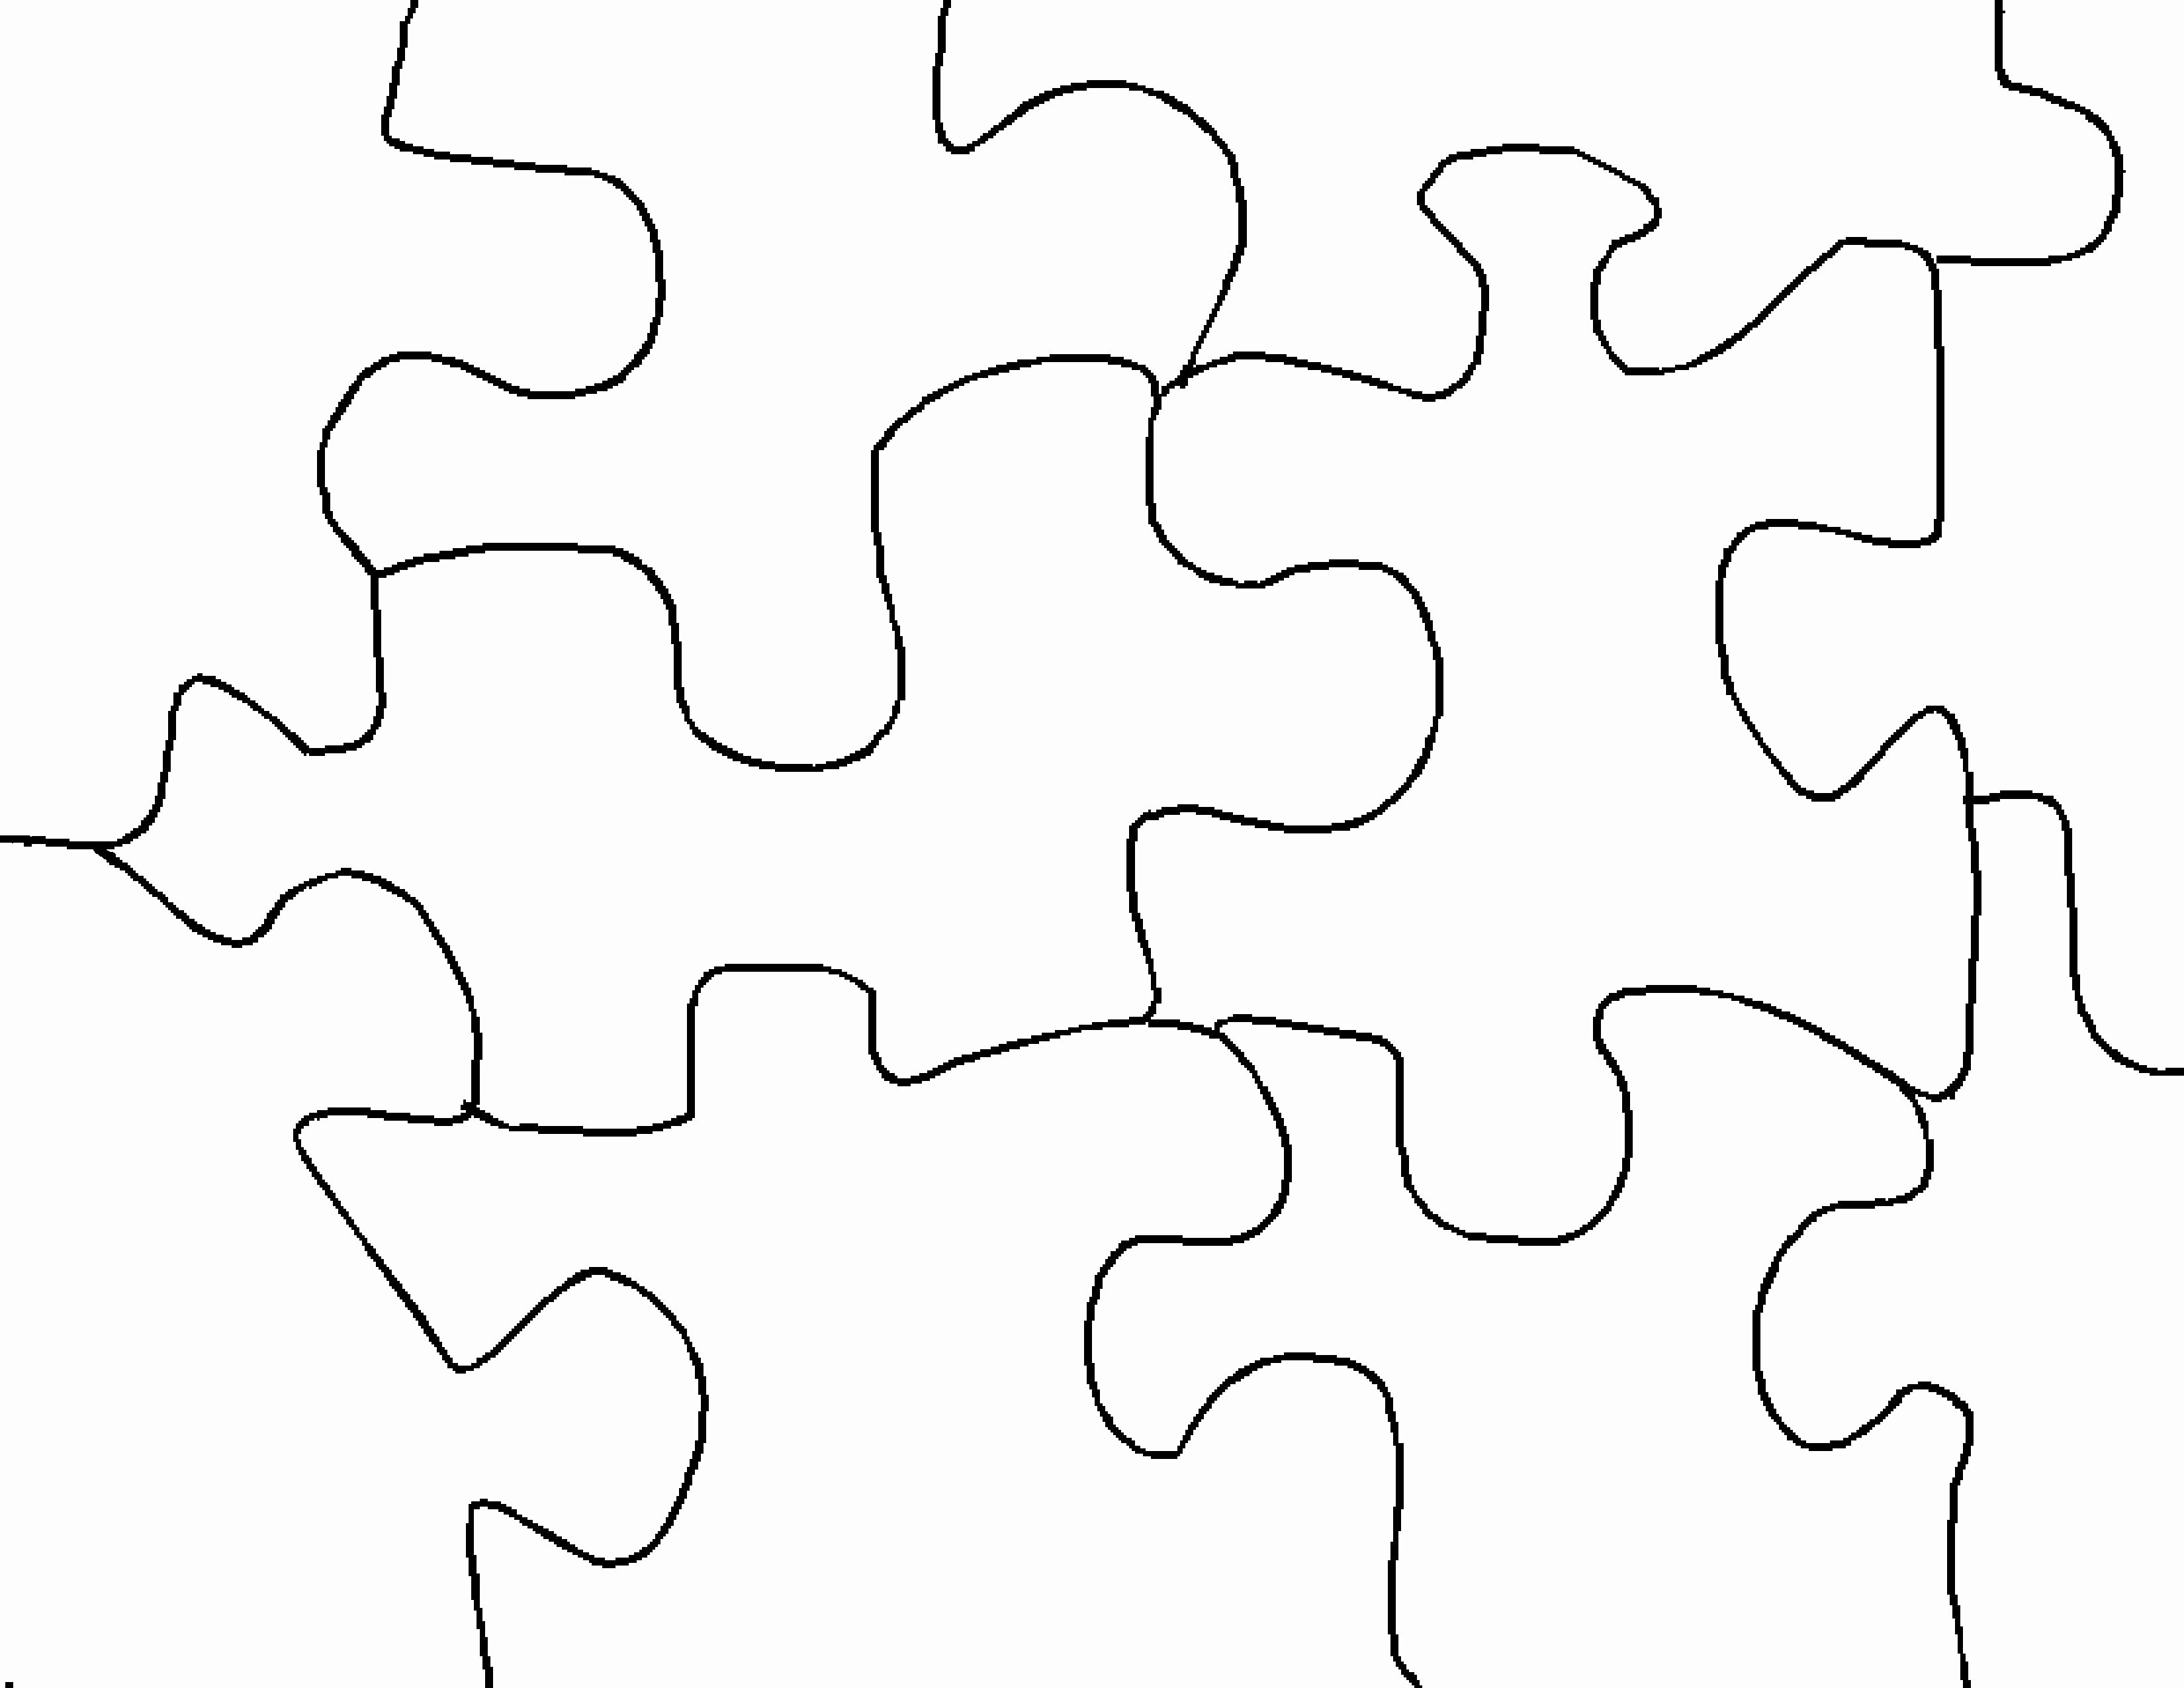 Search Results for “blank Template 8 X 11 Puzzle Piece